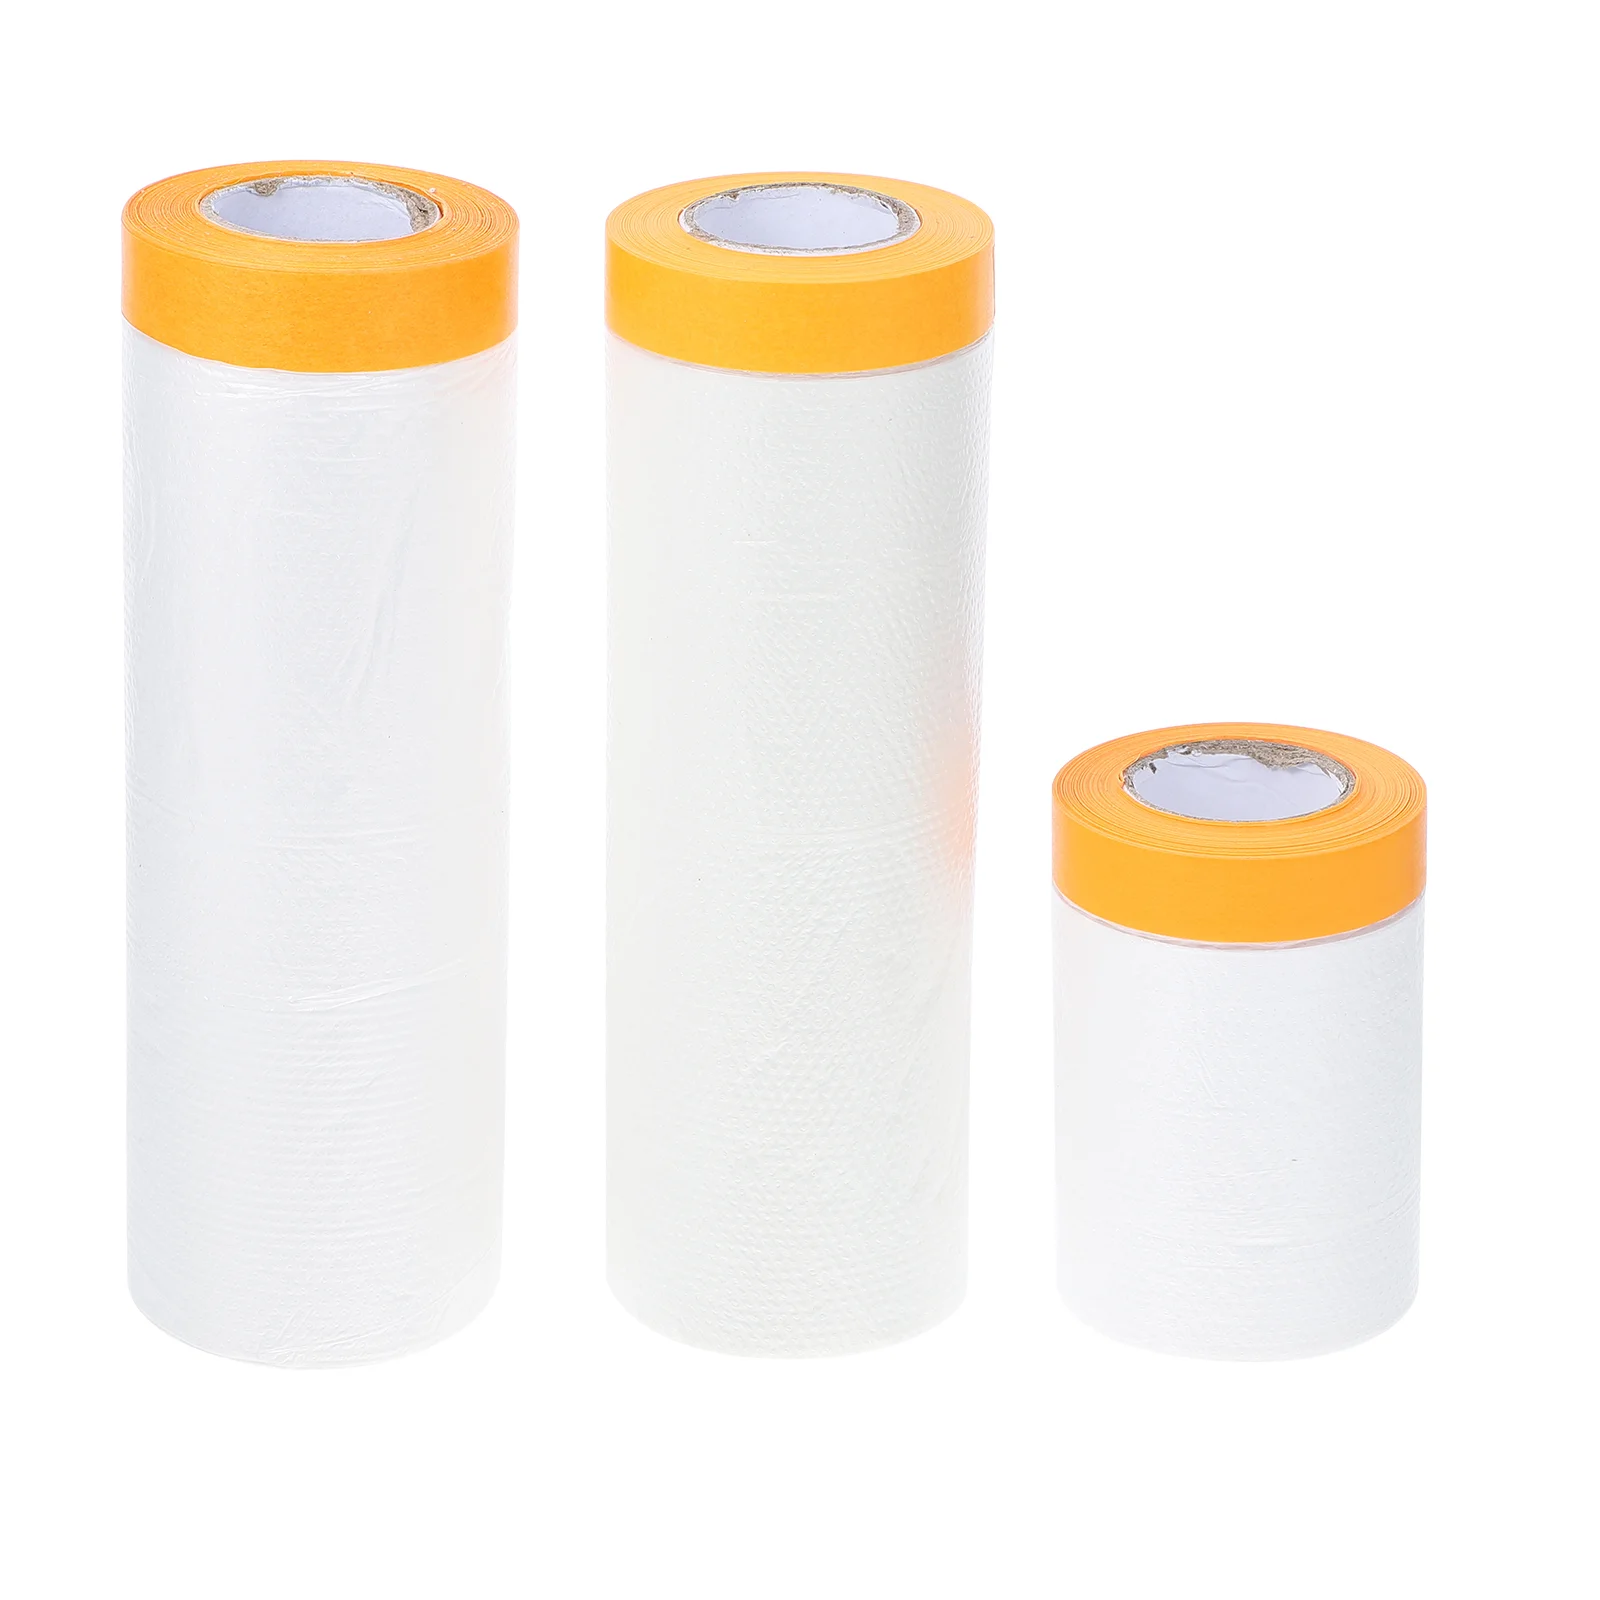 3 Rolls Car Paint Disposable Masking Paper Adhesive PVC Making Film 20 Meters 10 meters 18650 li ion battery insulation gasket paper 0 2mm cell insulating glue patch electrode insulated pads